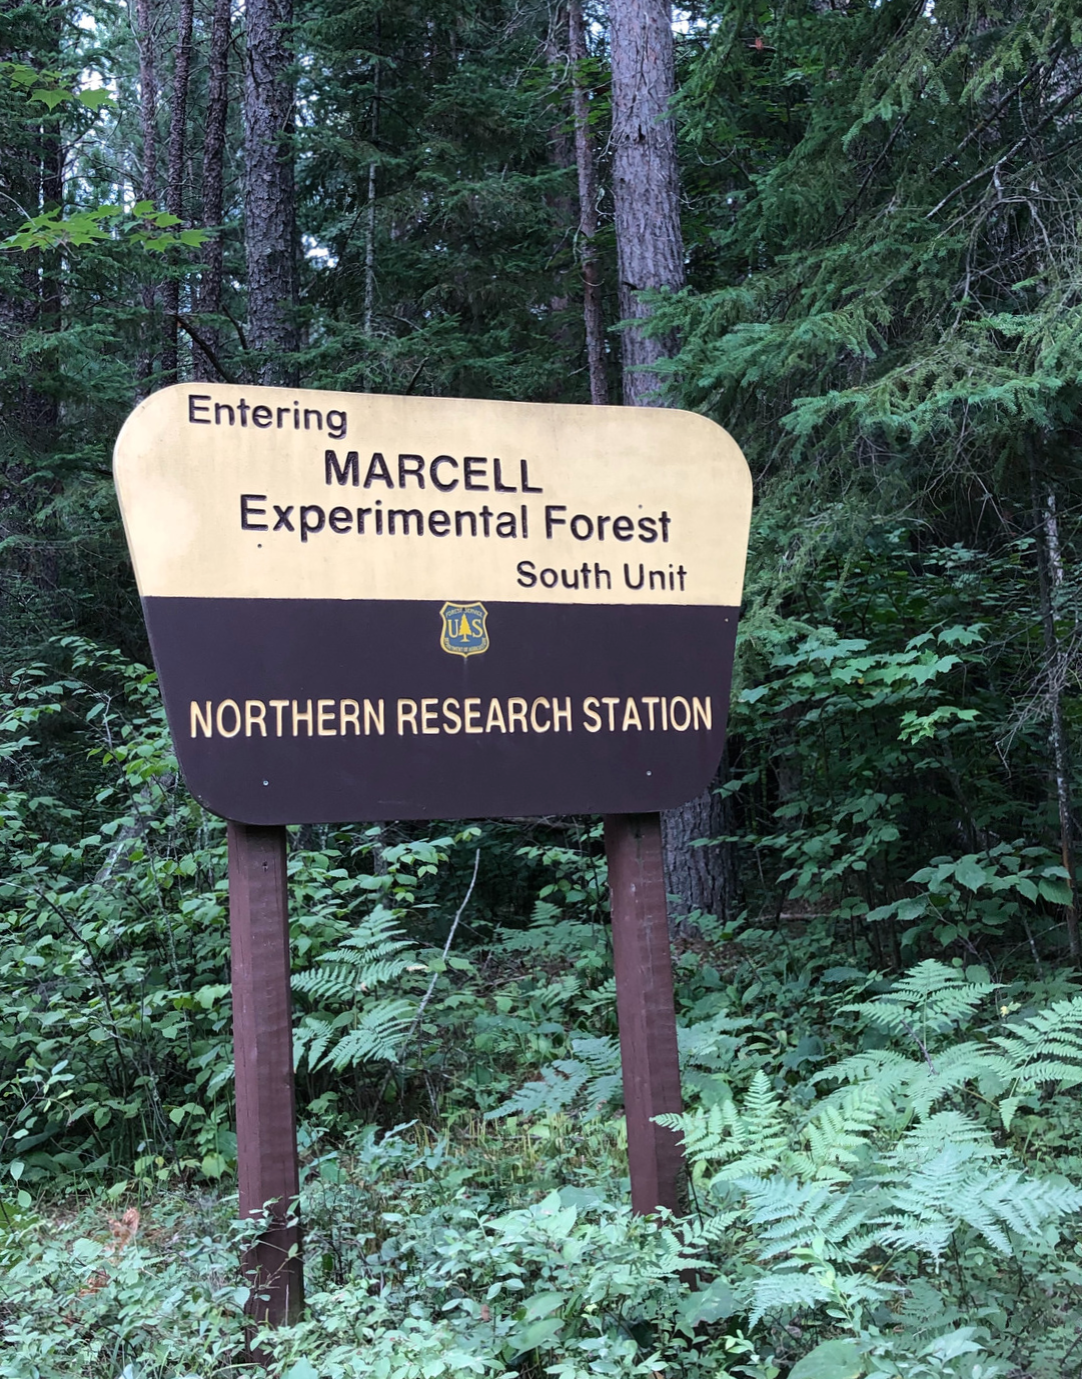 The entrance to Marcell Experimental Forest, part of the SPRUCE facility shared by the Oak Ridge National Laboratory and the U.S. Forest Service. (Photo Joel Kostka)